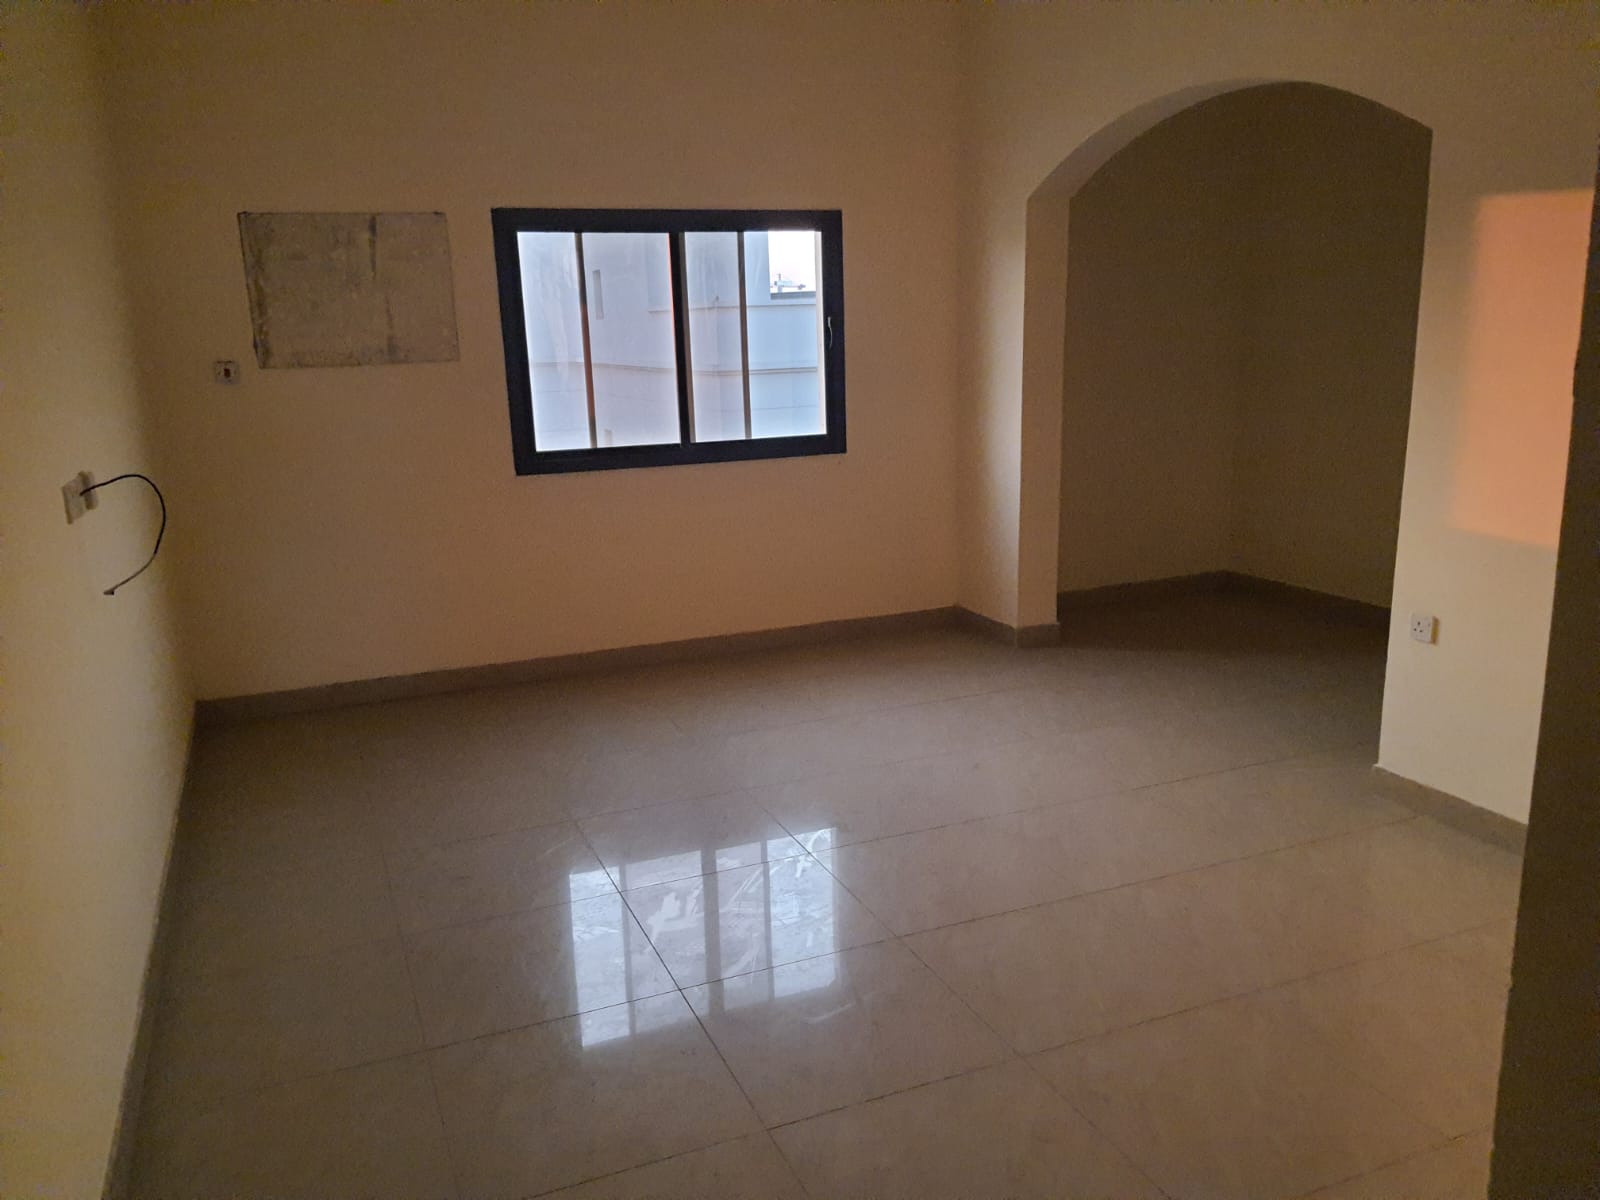 For Rent An Apartment In Tubli Bay